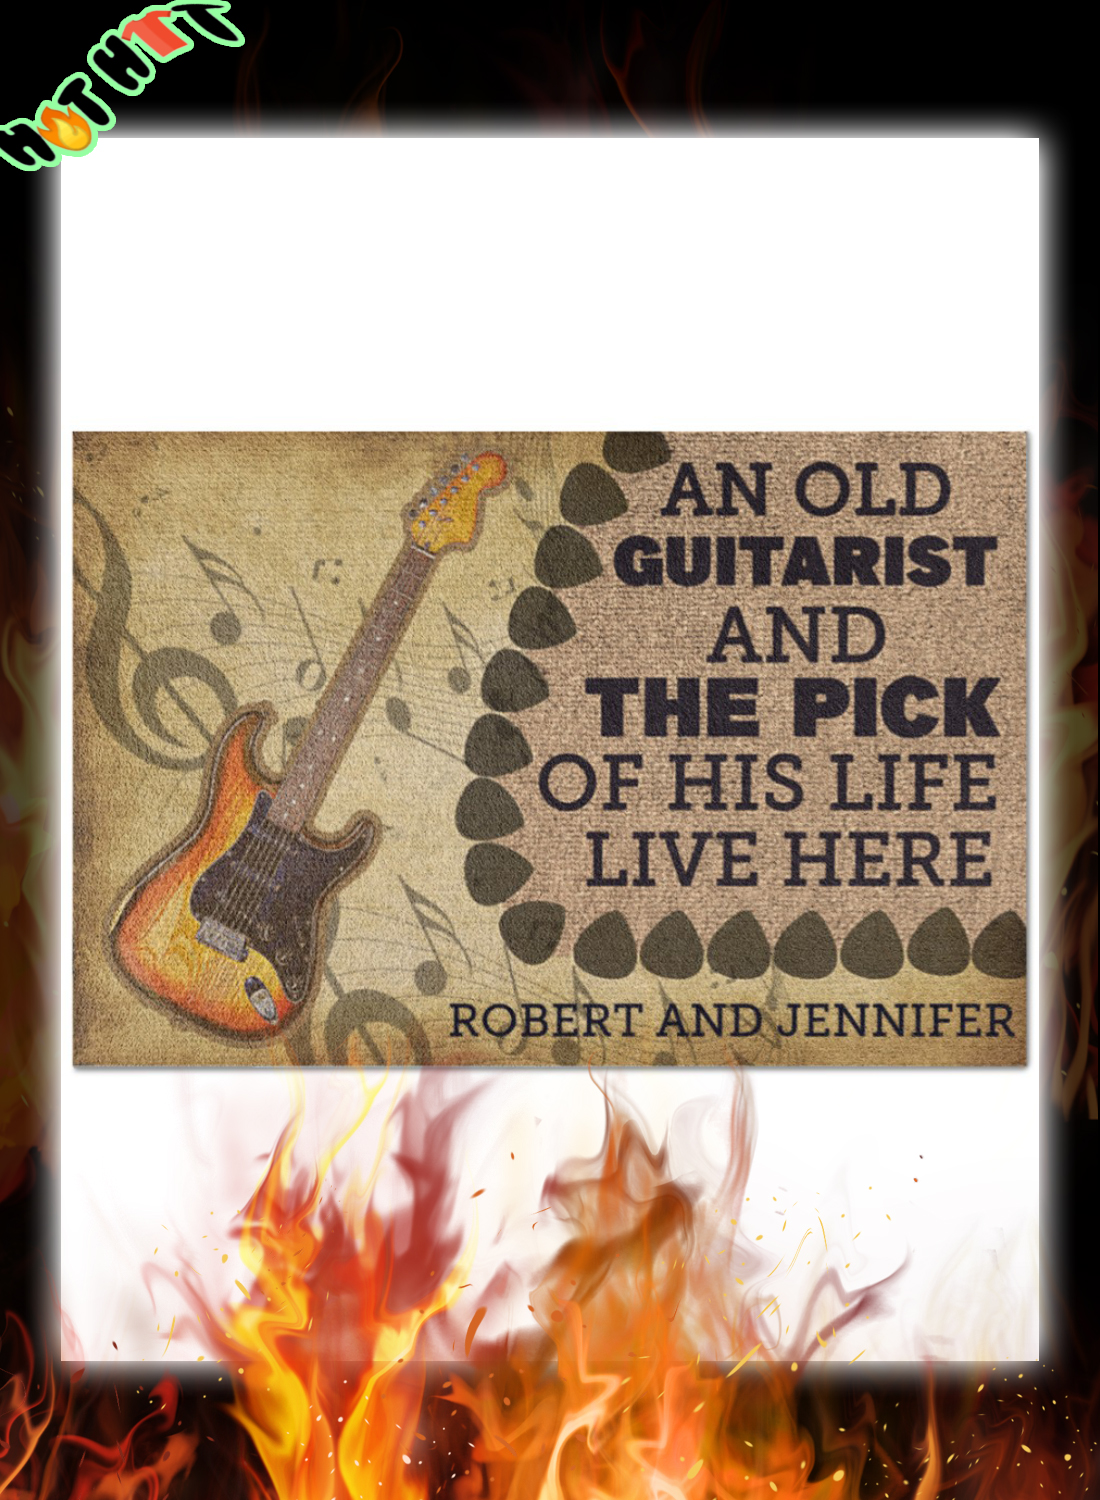 An old guitarist and the pick of his life personalized doormat